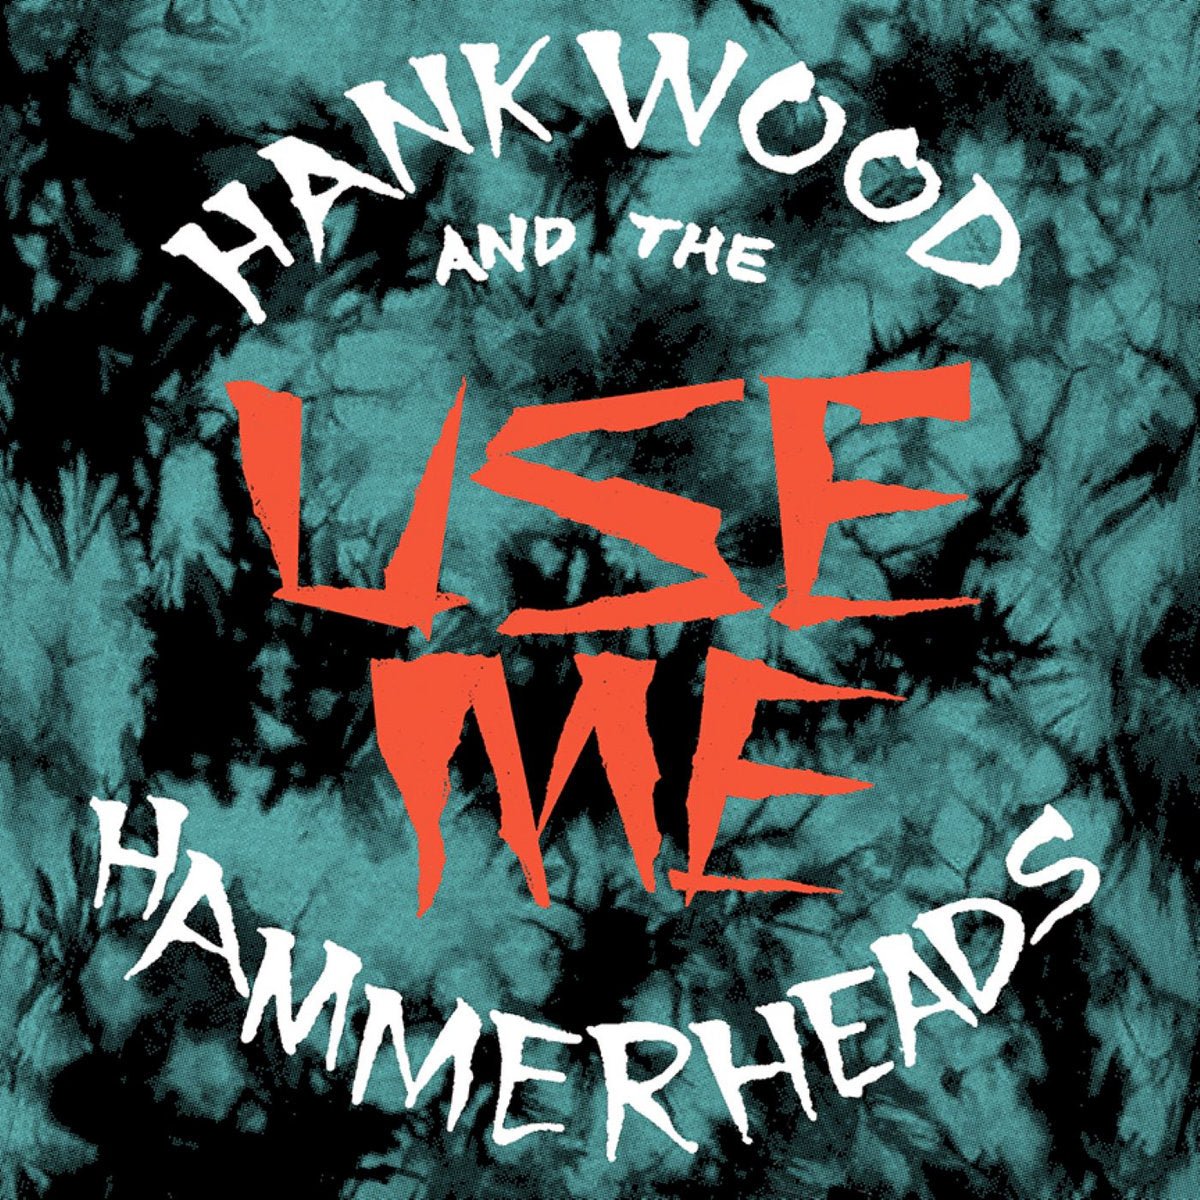 Hank Wood And The Hammerheads - Use Me 7" - Vinyl - Toxic State